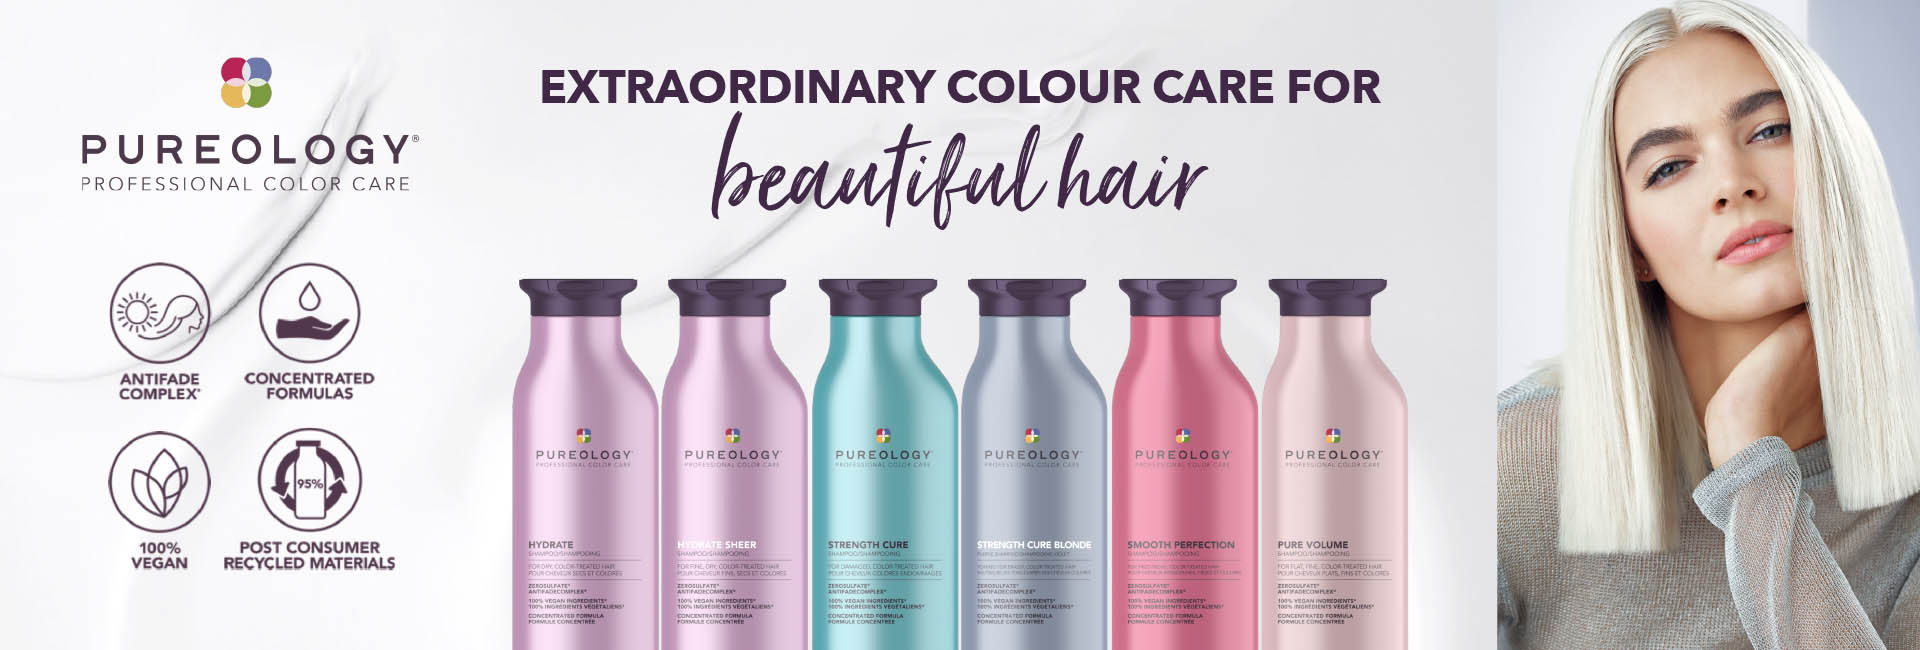 PUREOLOGY promotional banner